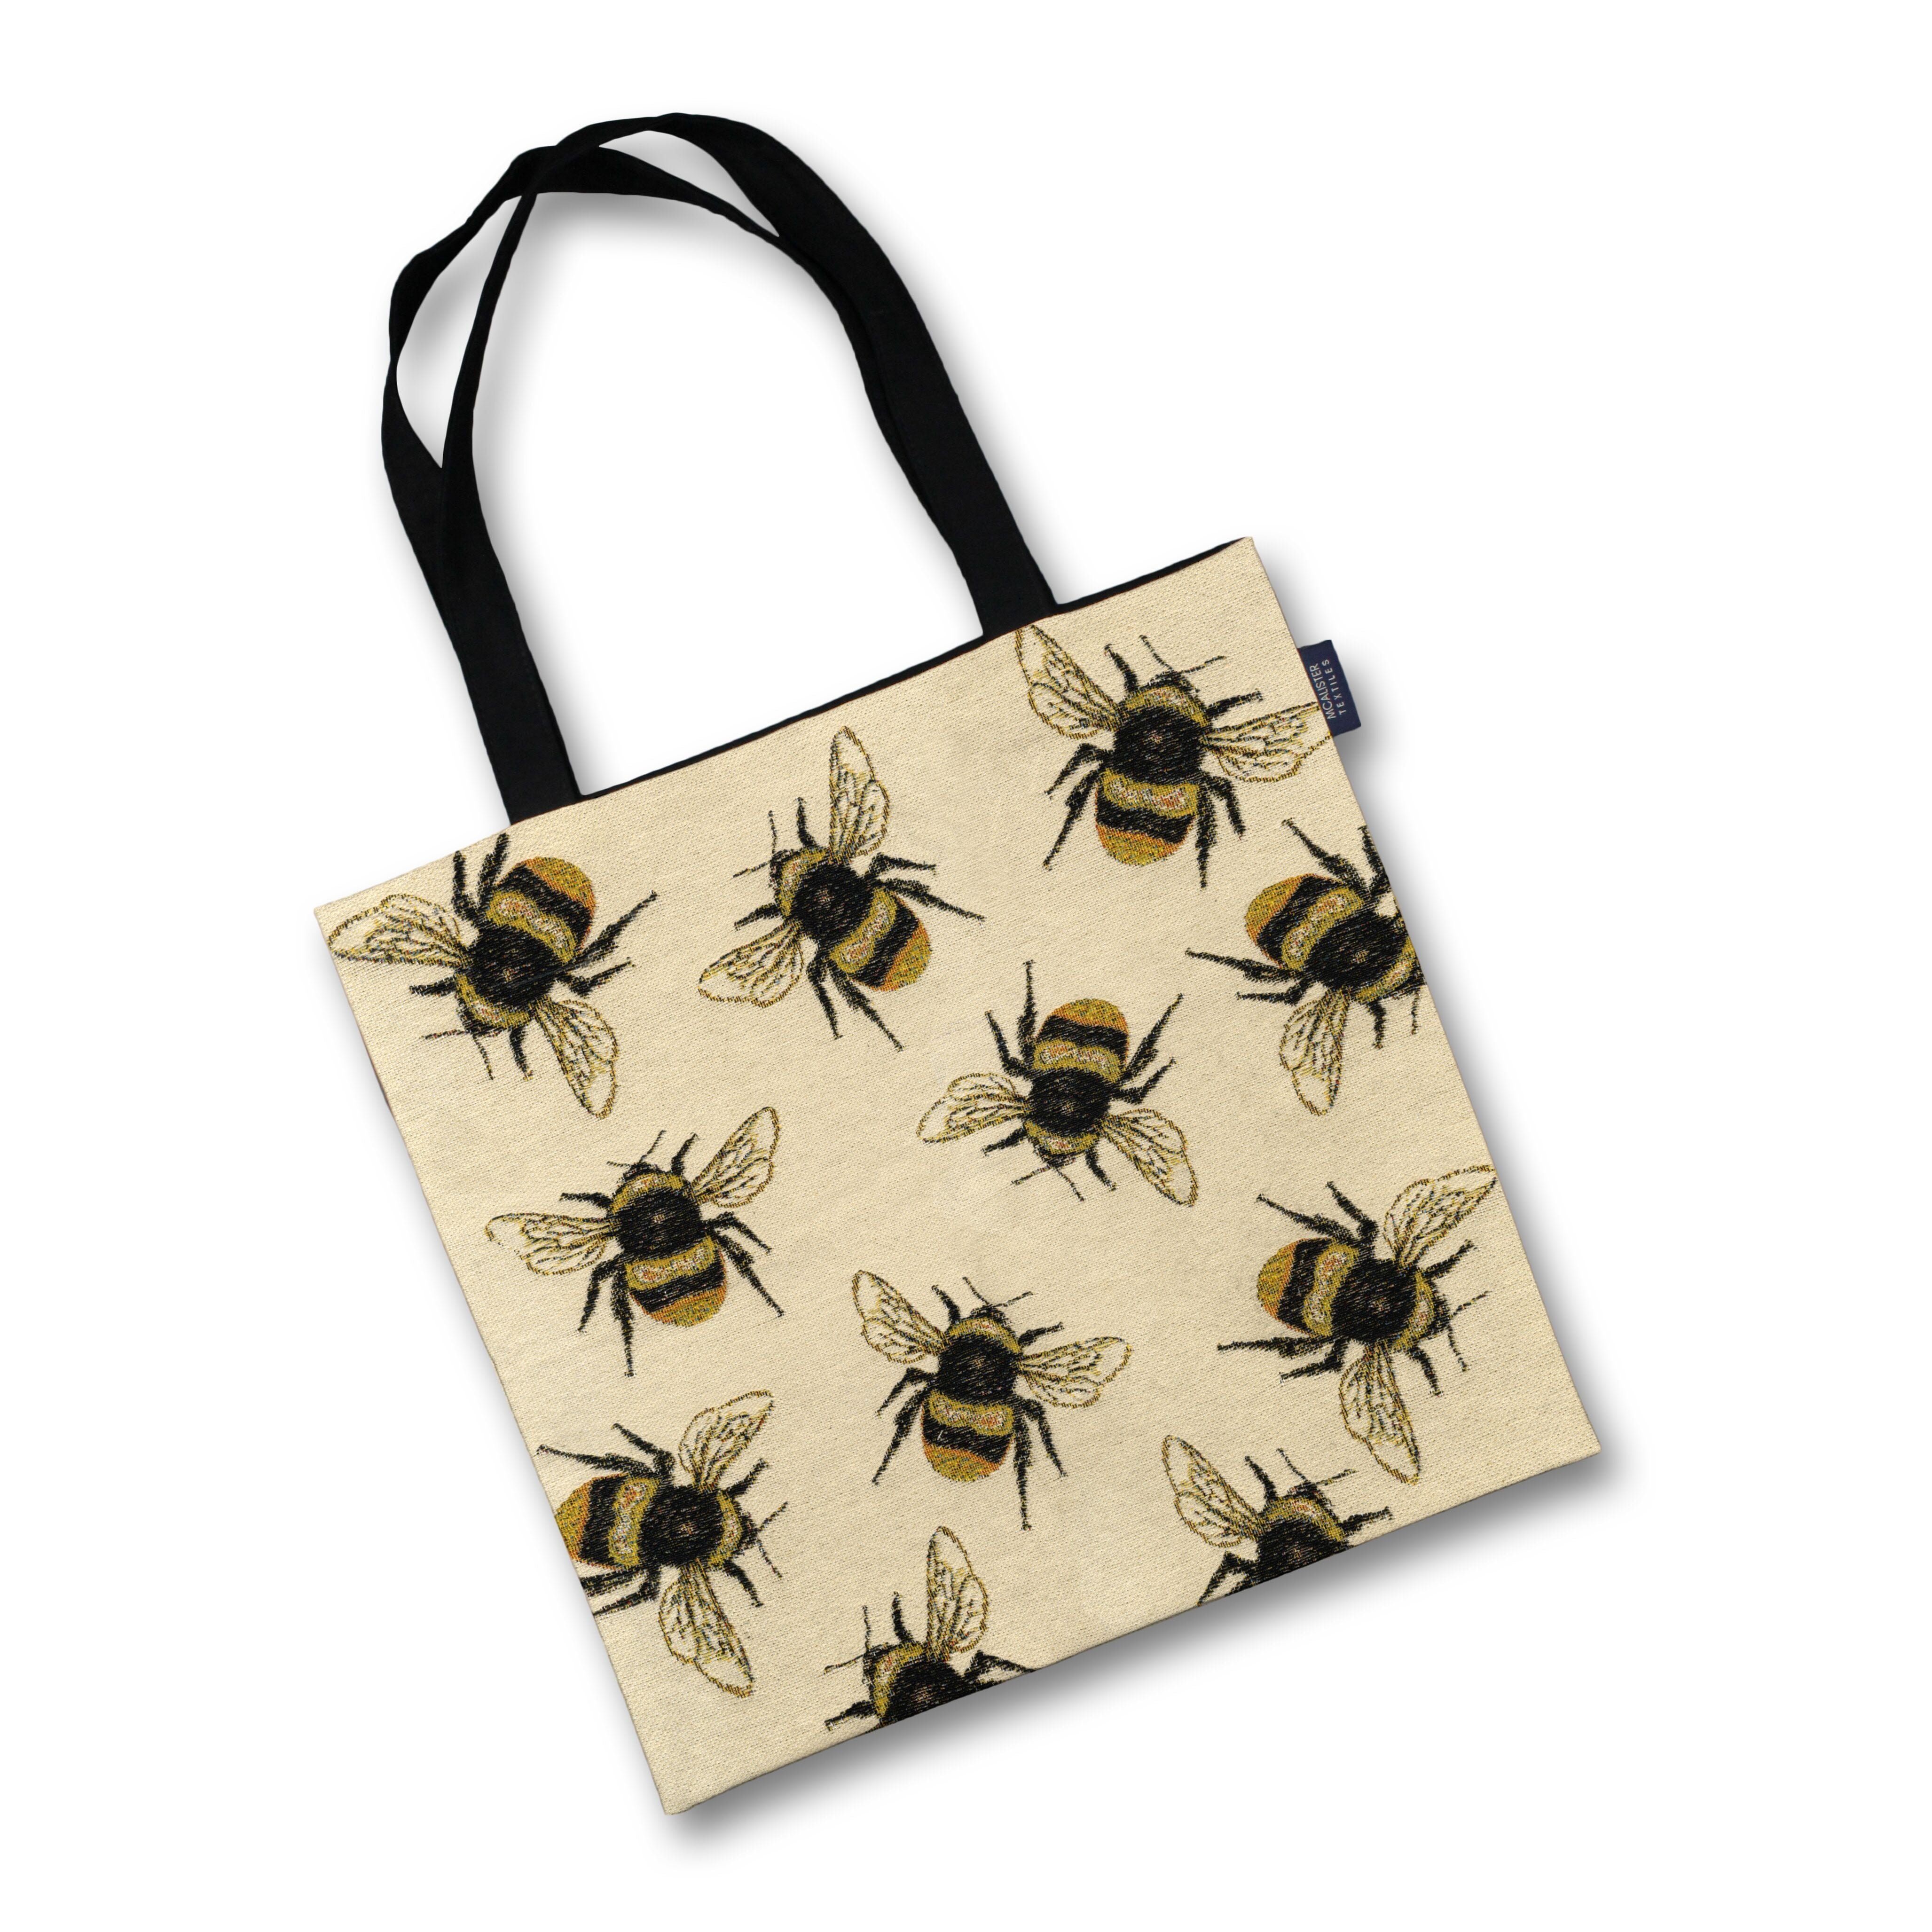 Illustrated Bumble Bee Shoulder Bag, Bees and Bramble Print Design. Cotton Tote  Bag Gift for Her. Friend Daughter Mum Sister Gift Ideas - Etsy